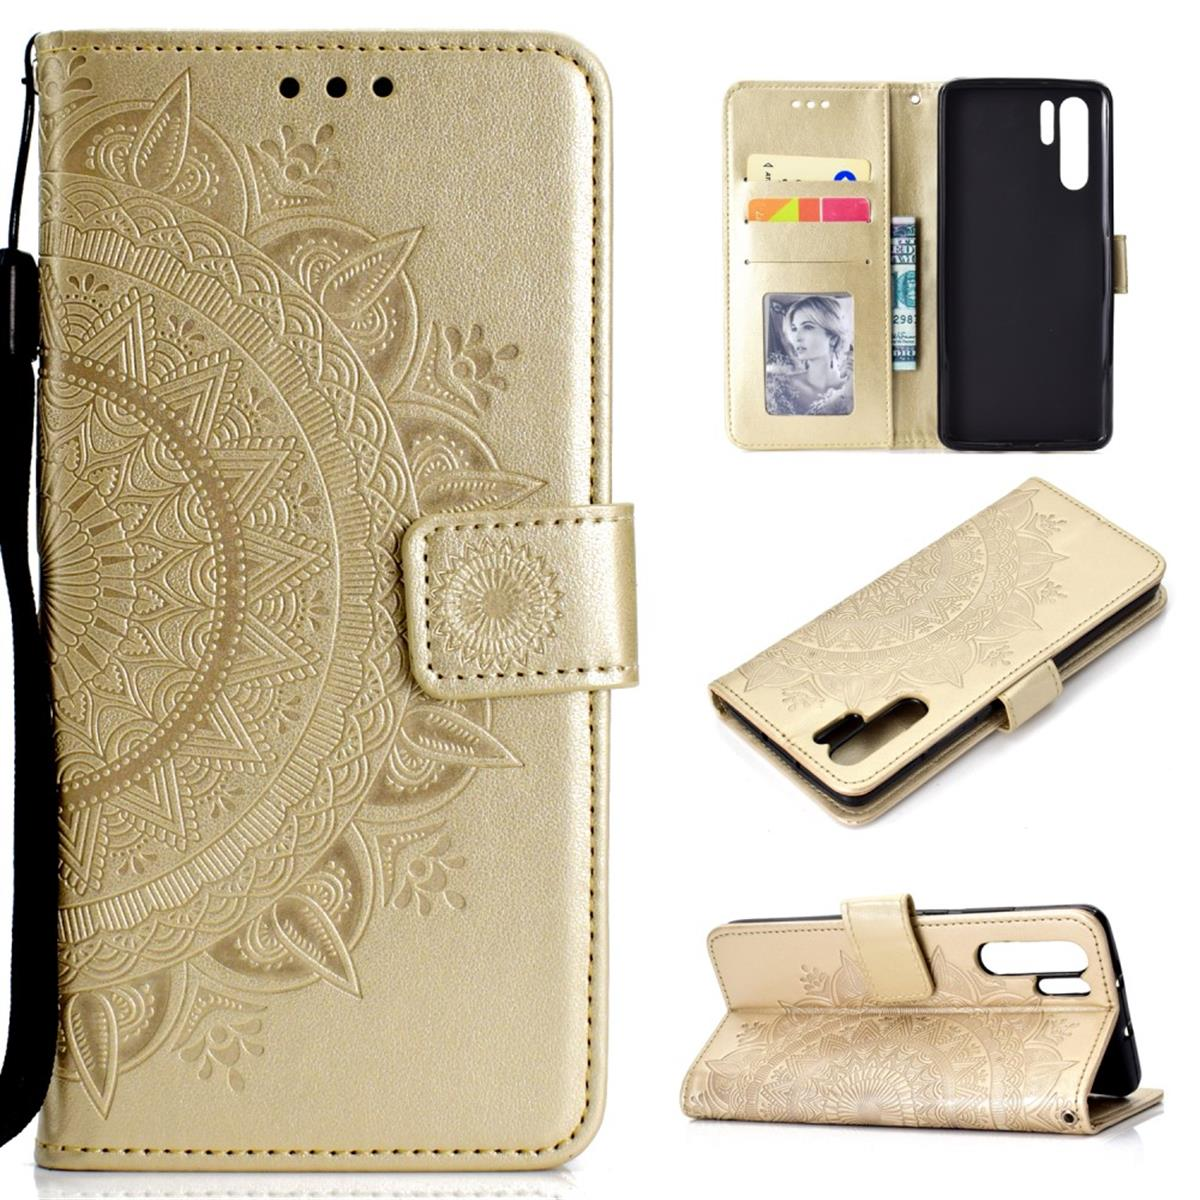 COVERKINGZ Klapphülle mit Mandala Bookcover, Gold Pro, P30 Huawei, Muster